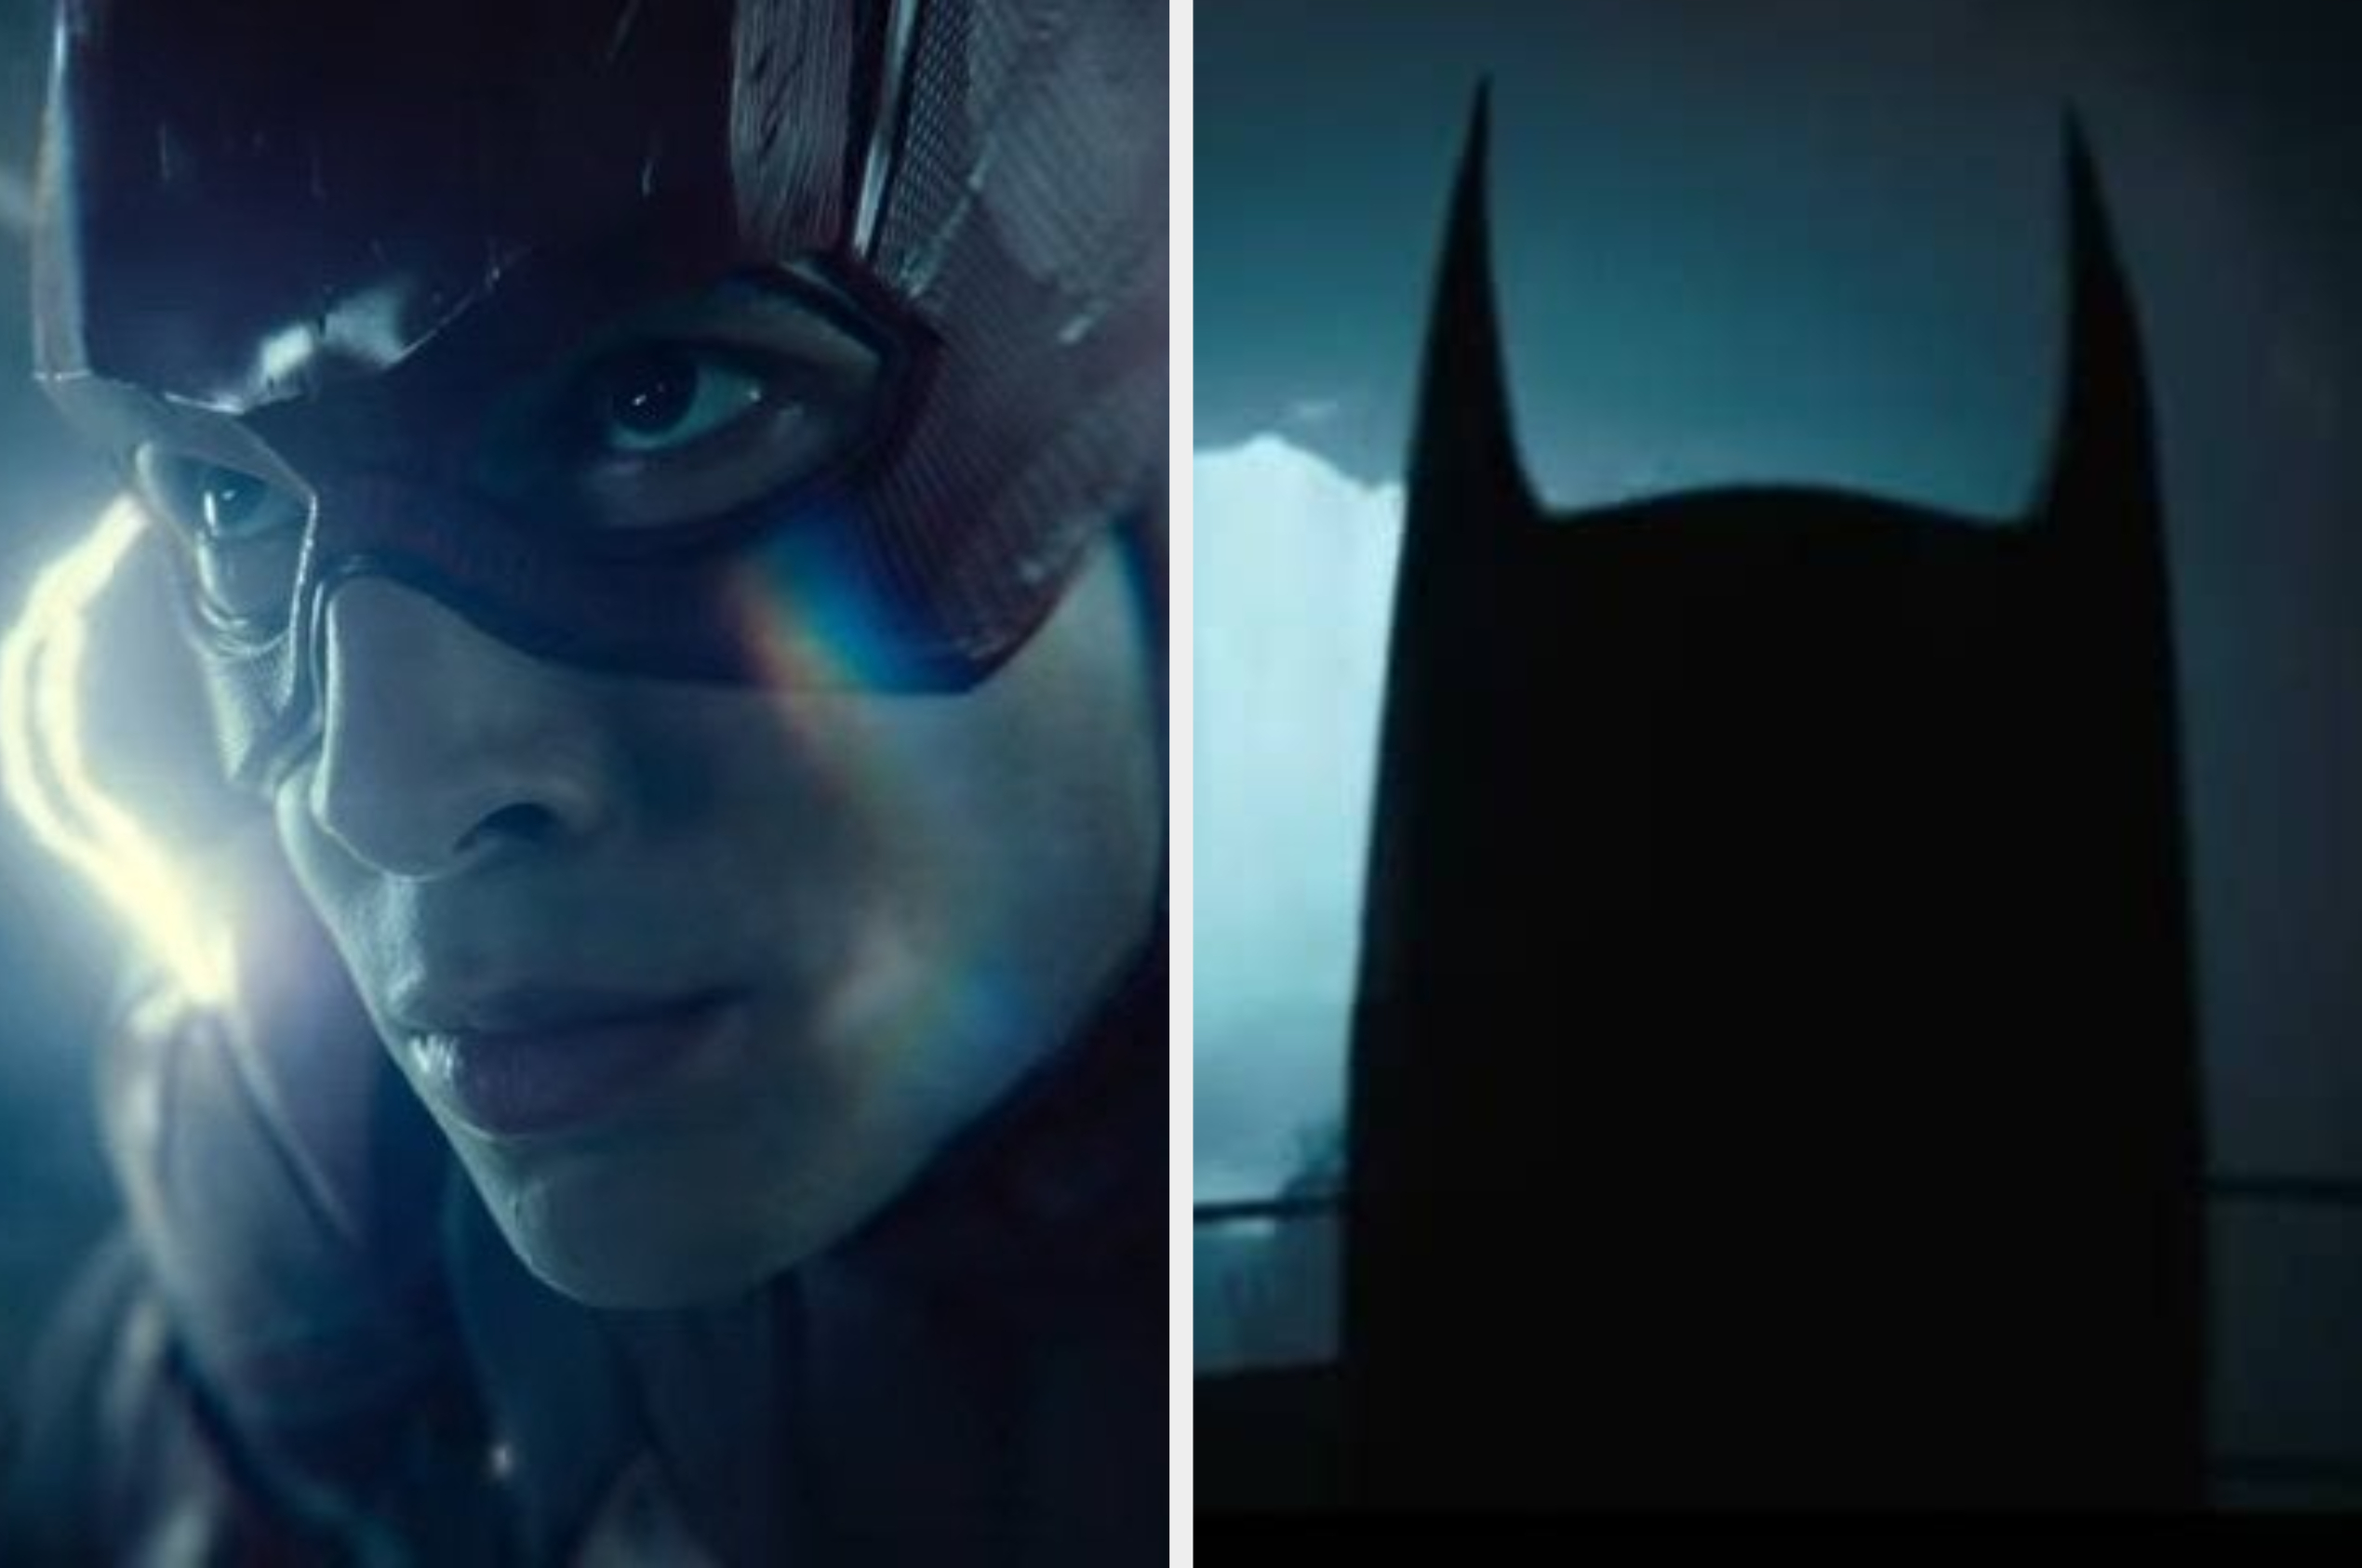 The Flash's DCEU Reboot Theory Is Less Likely Now